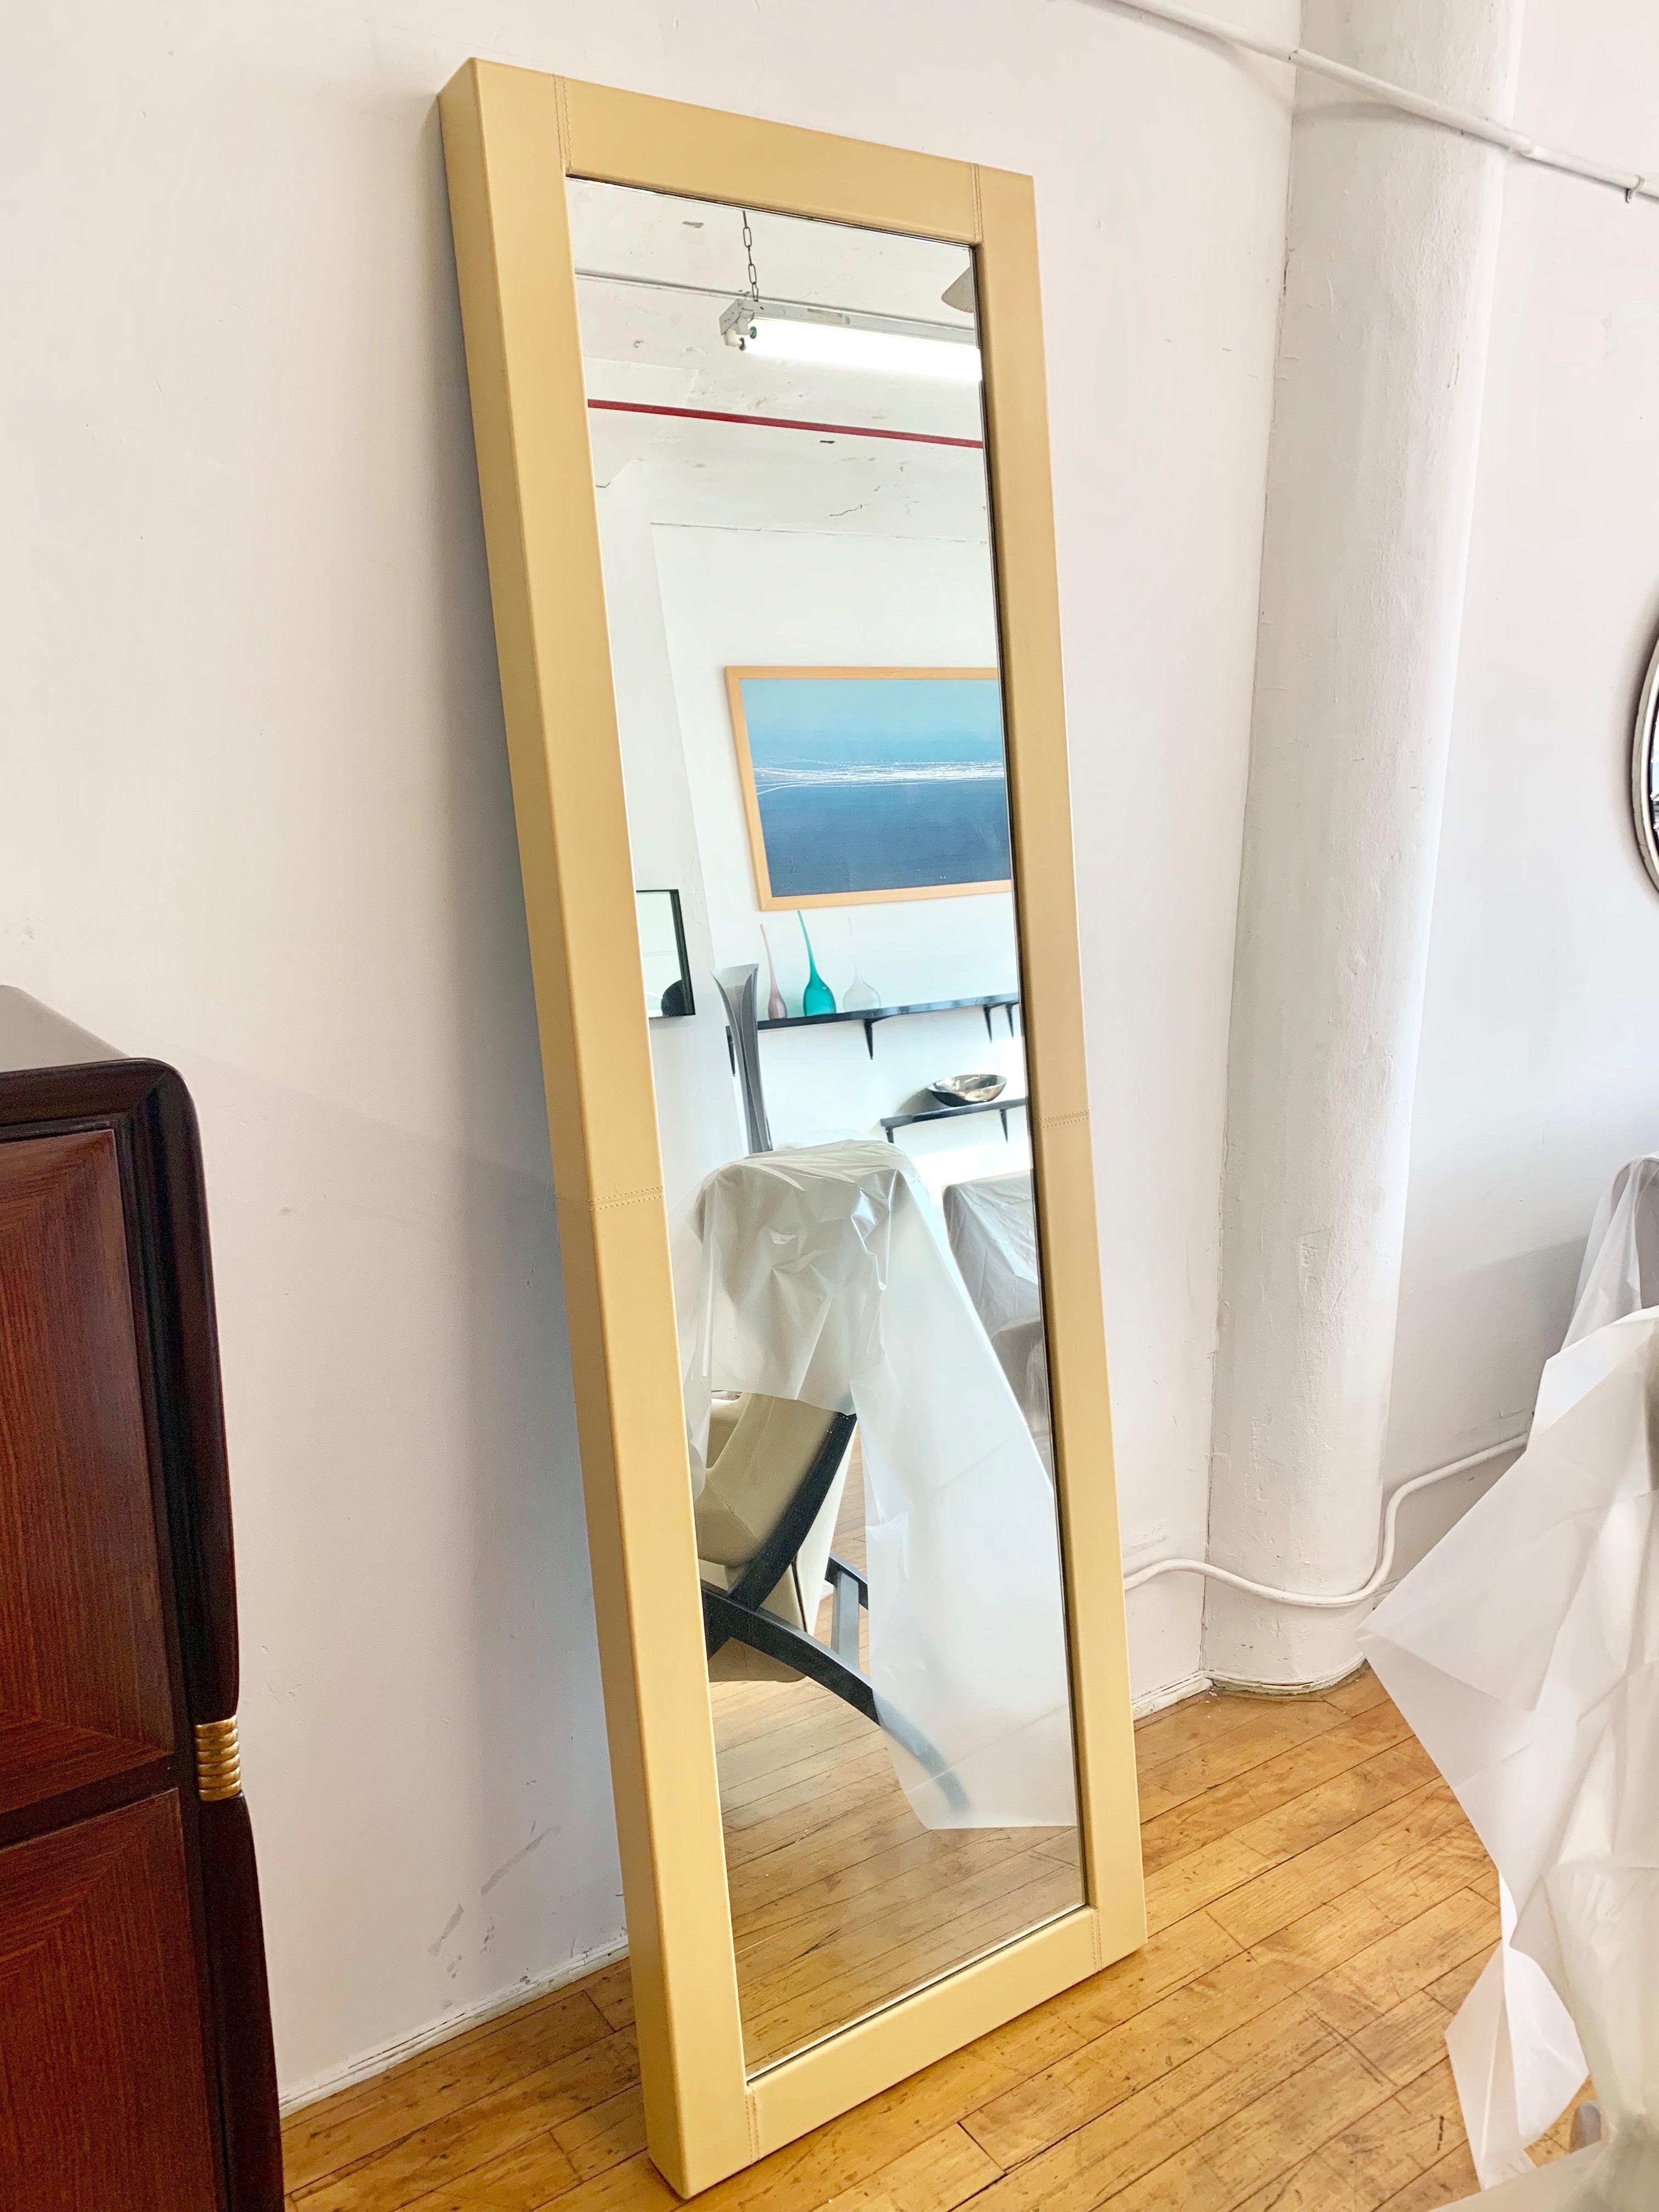 Modern Italian floor leather covered mirror, leather covered on all sides with visible stitching details, 83